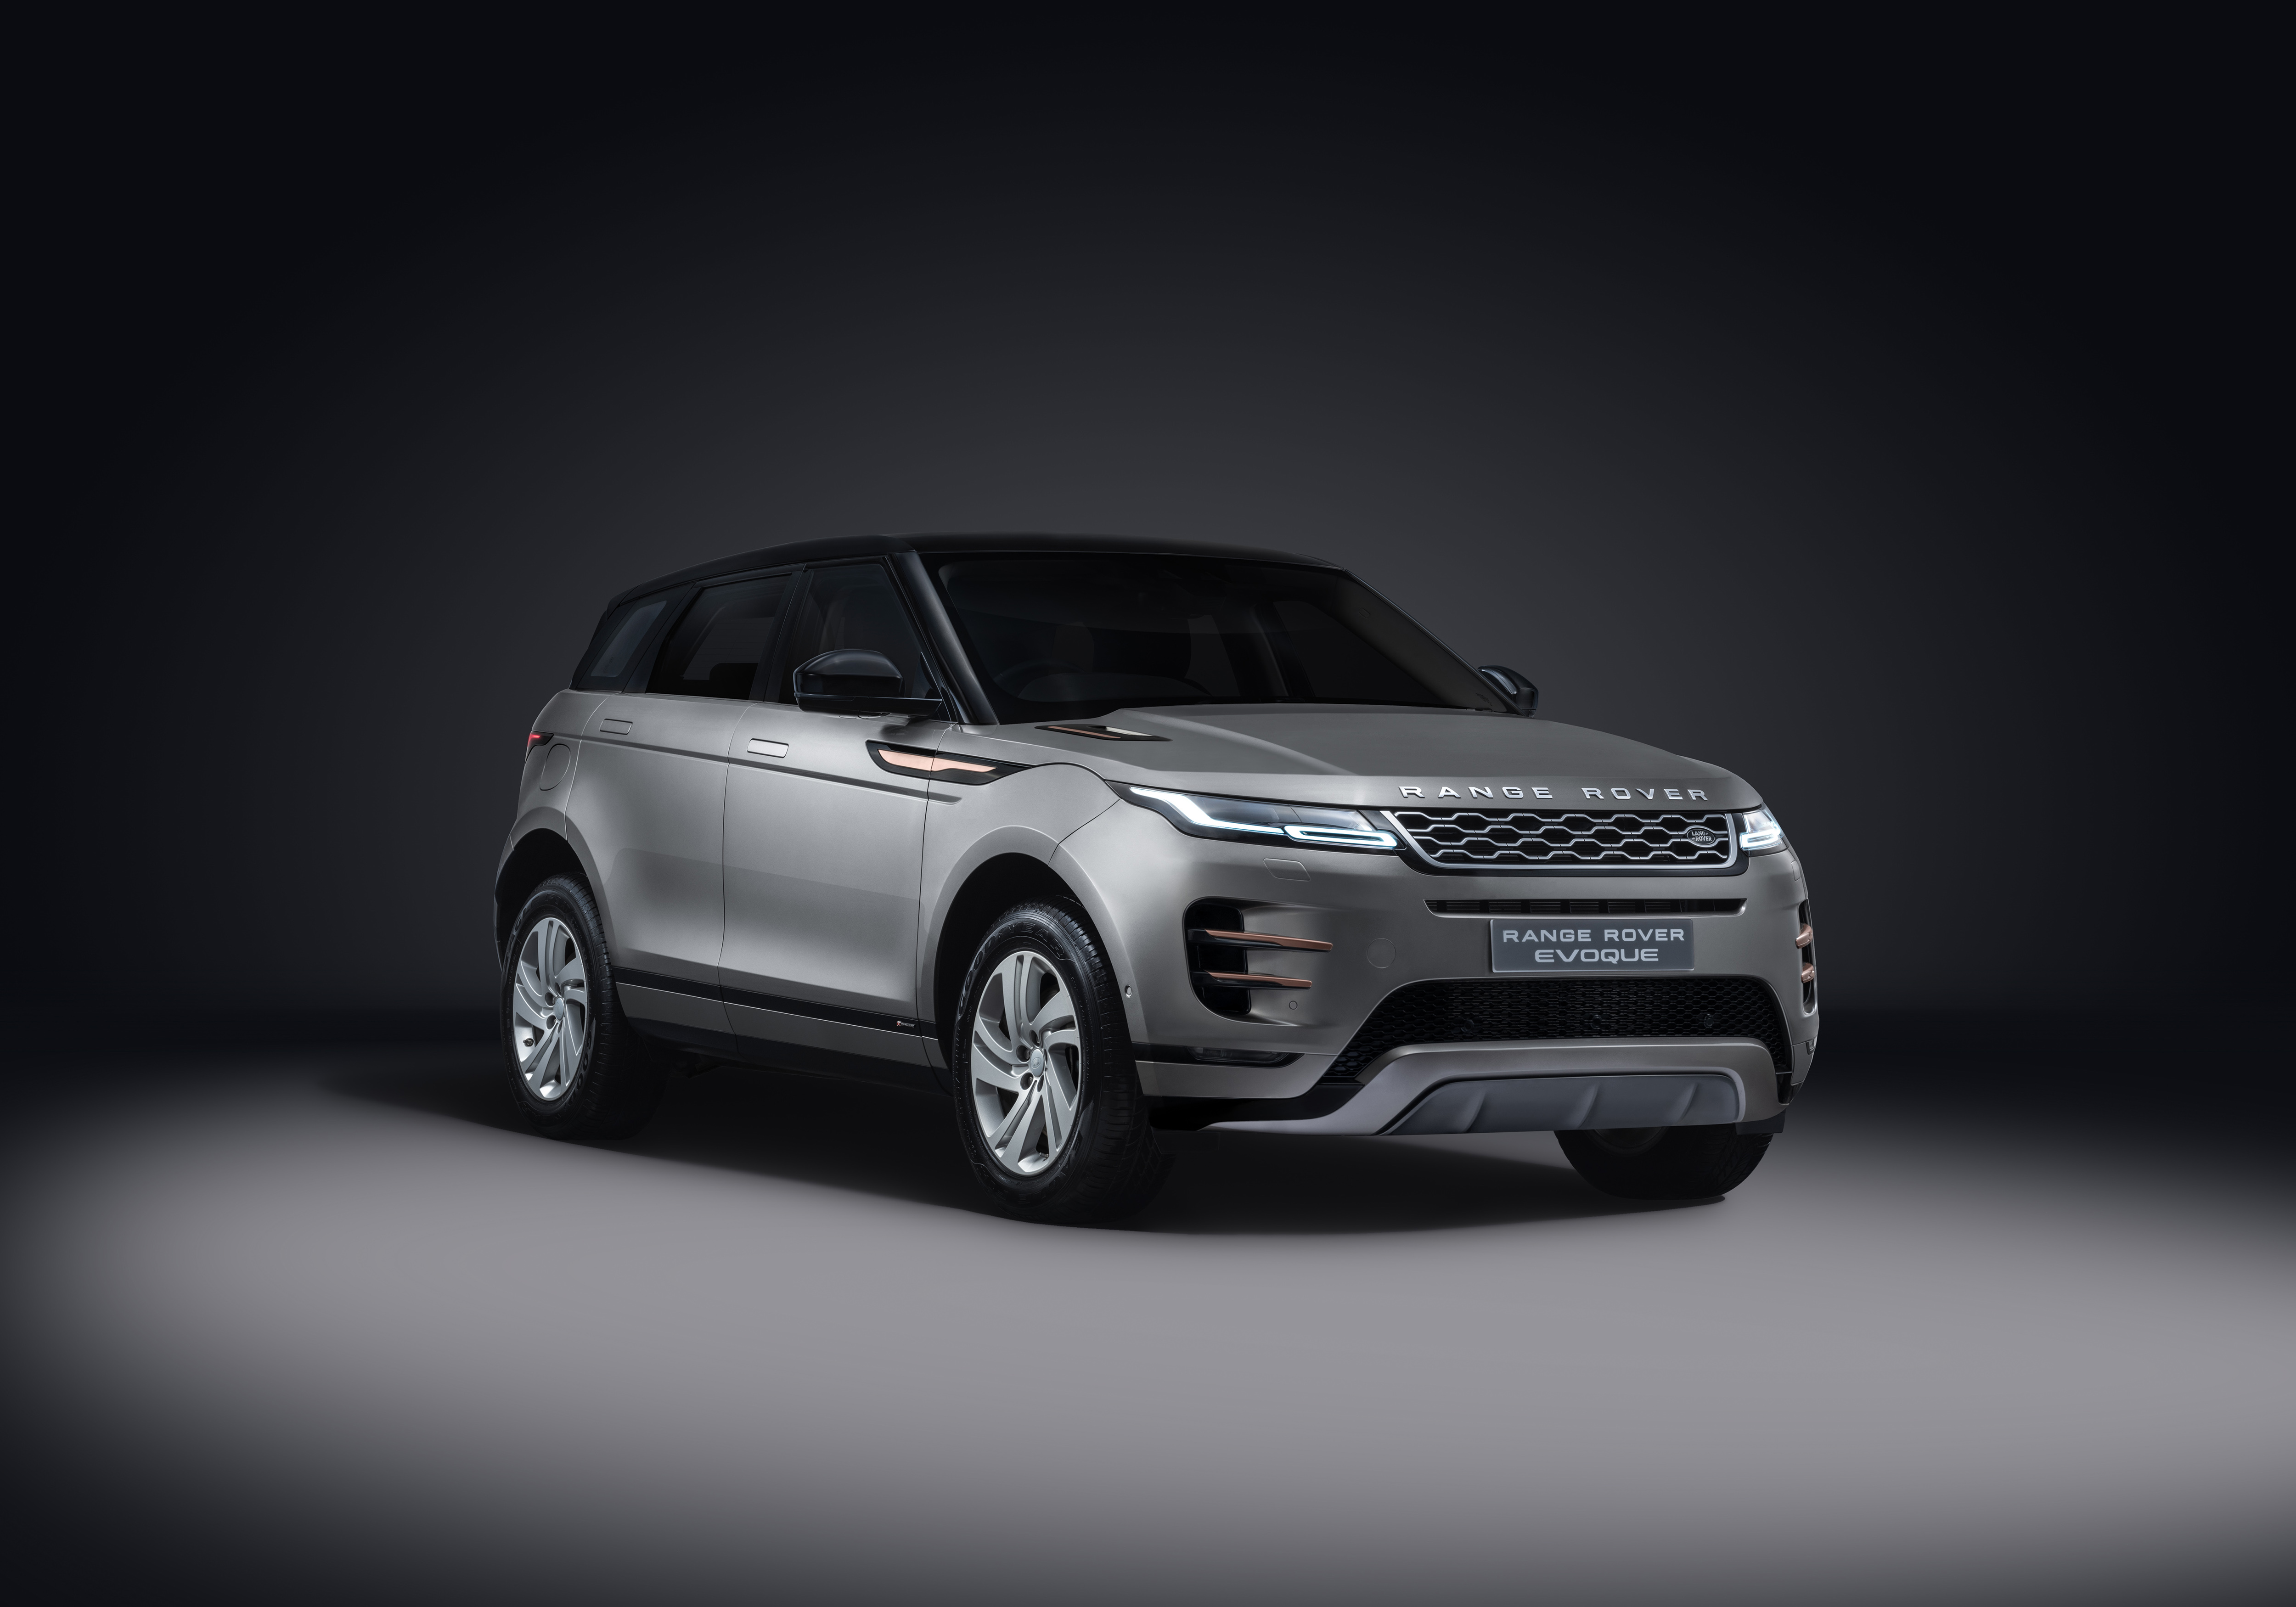 NEW RANGE ROVER EVOQUE INTRODUCED IN INDIA WITH PRICES FROM ₹ 64.12 Lakh